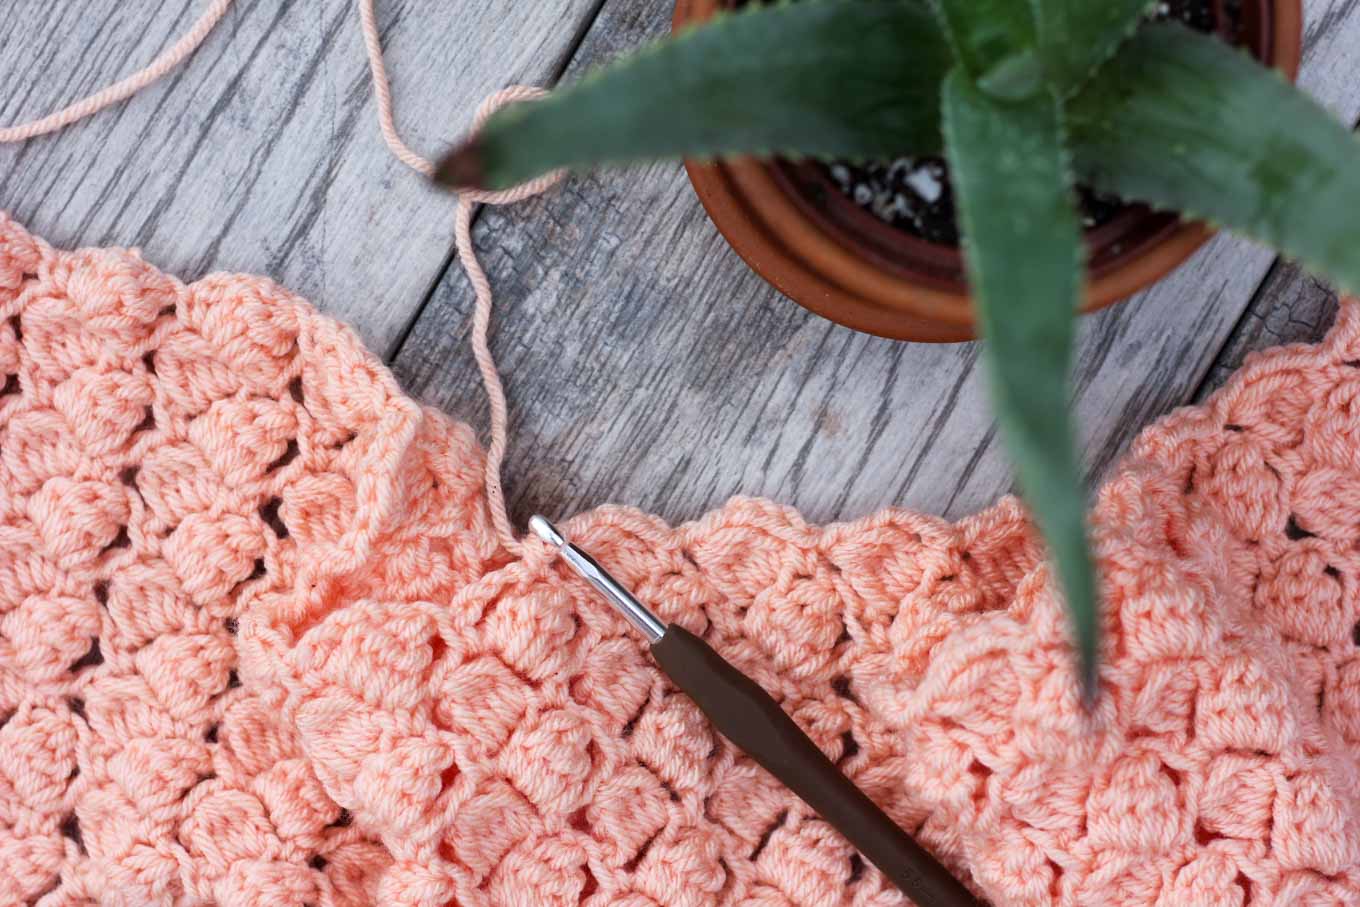 Side Saddle Stitch - These different basic crochet stitches are the fundamentals to becoming an inventive crocheter. You could use these crochet stitches for blankets or a multitude of other projects. #SingleCrochetStitch #TunisianCrochet #BasicCrrochetStitches